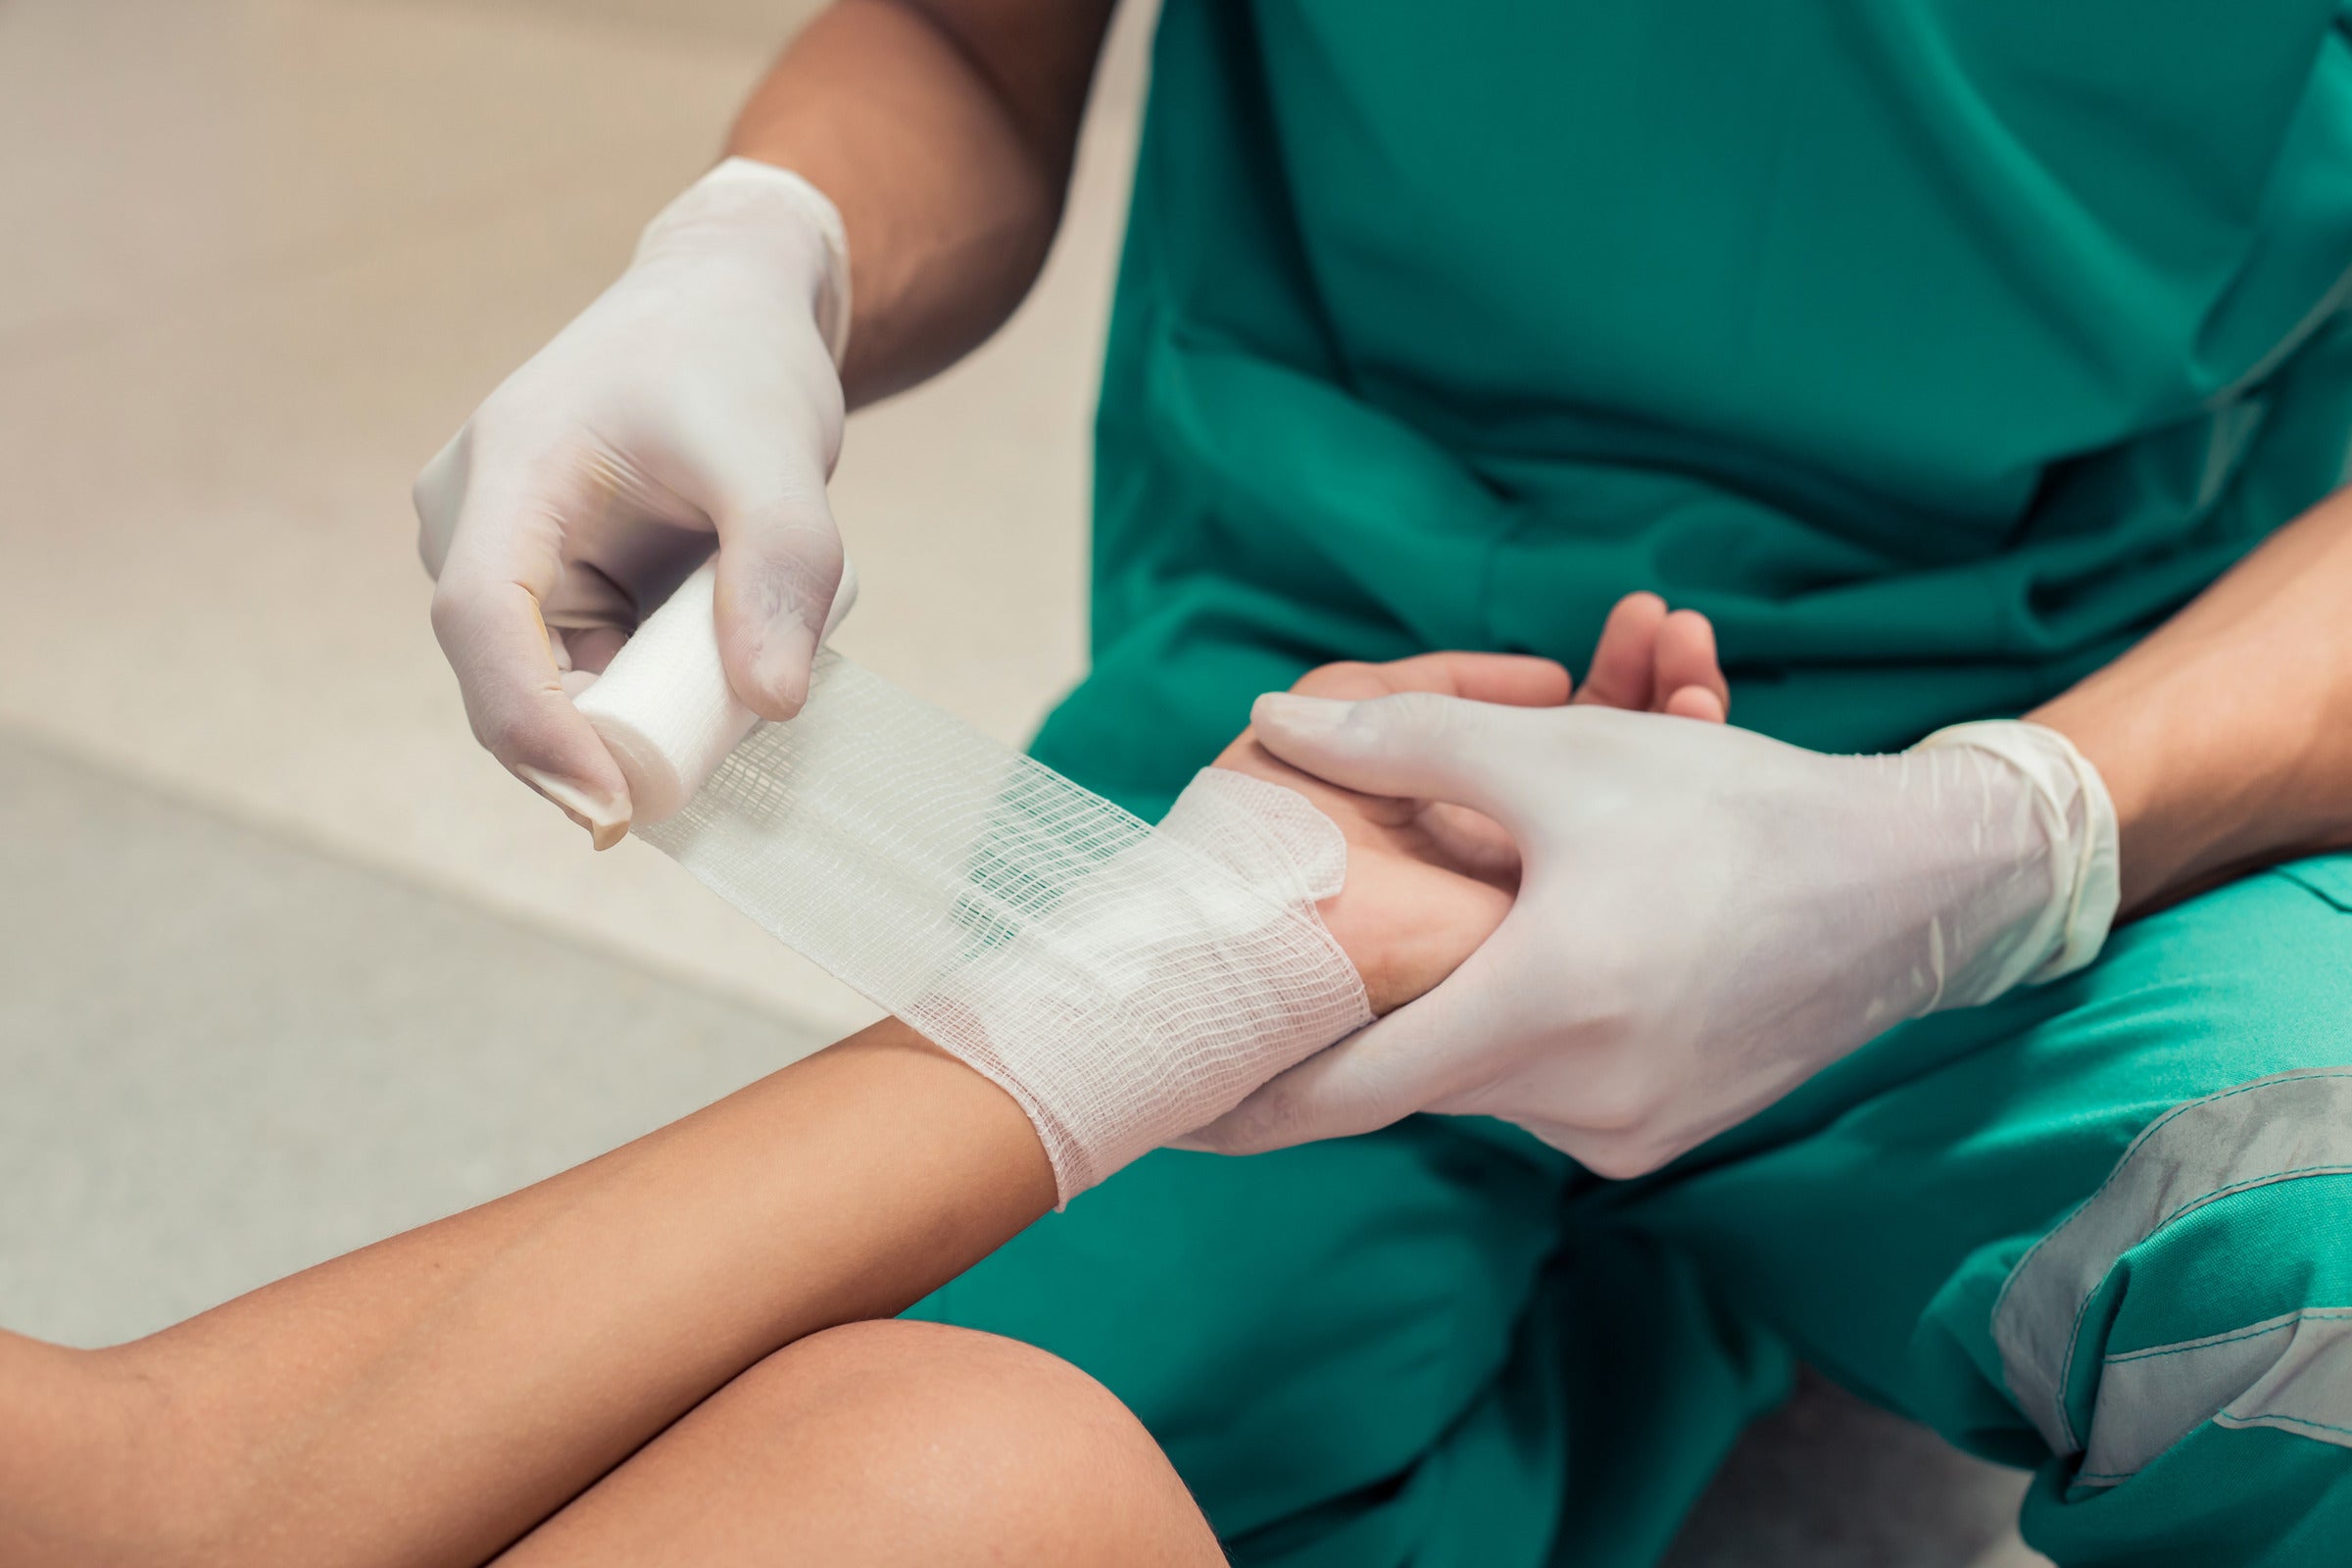 Wound care and hygiene after minor surgery Alternatives to antibiotics